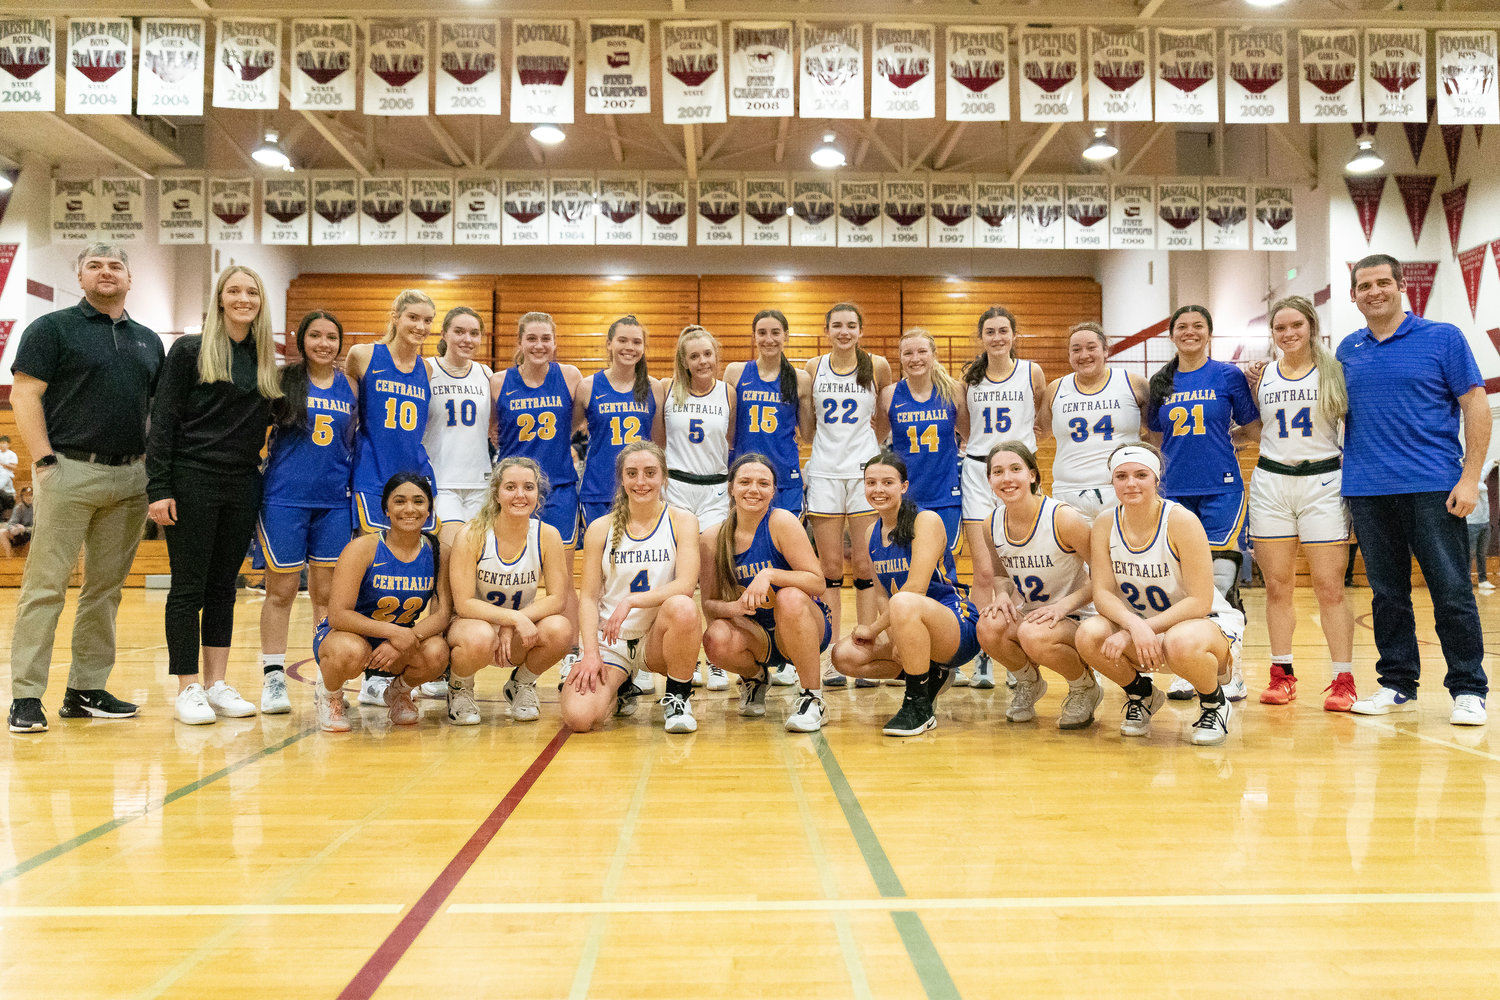 The SWW Senior All-Stars pose after competing in a game March 26 at W.F. West.